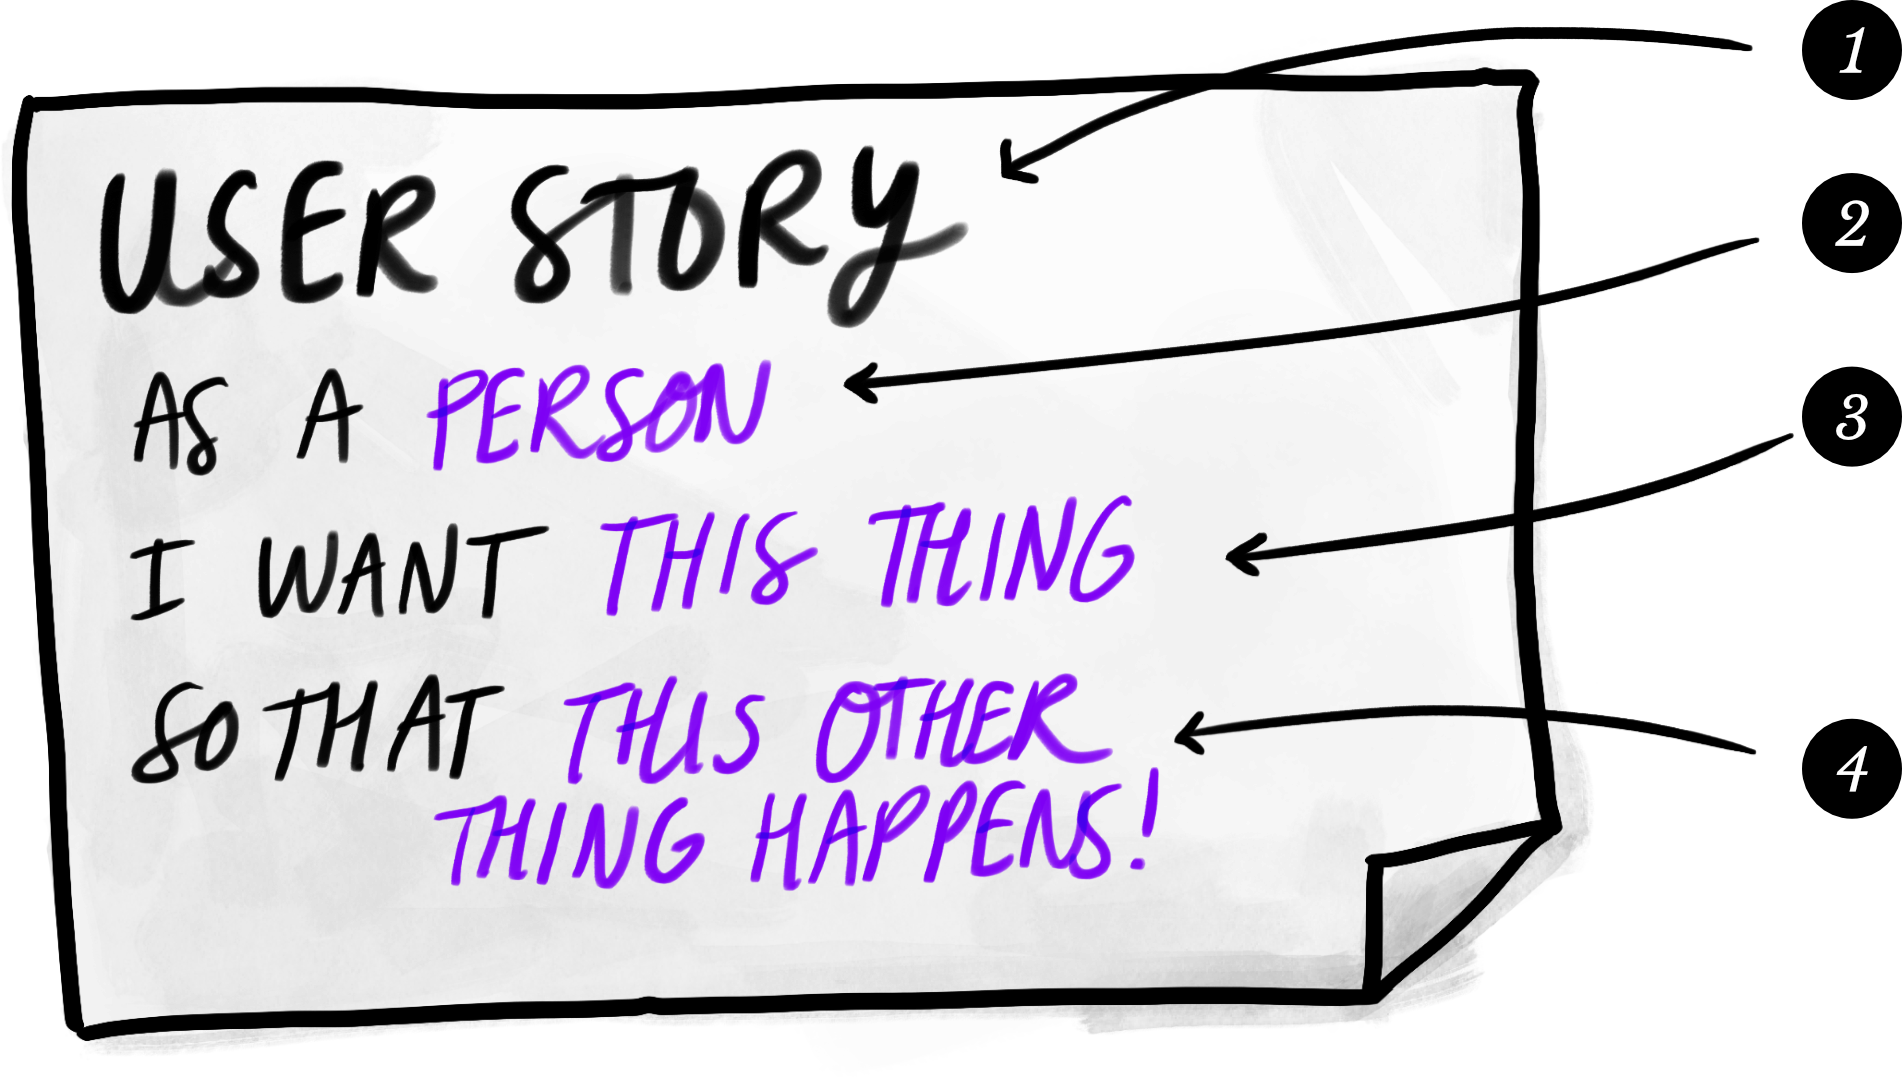 Typical format for a User Story: As a Person, I want this thing, so that this other thing happens!